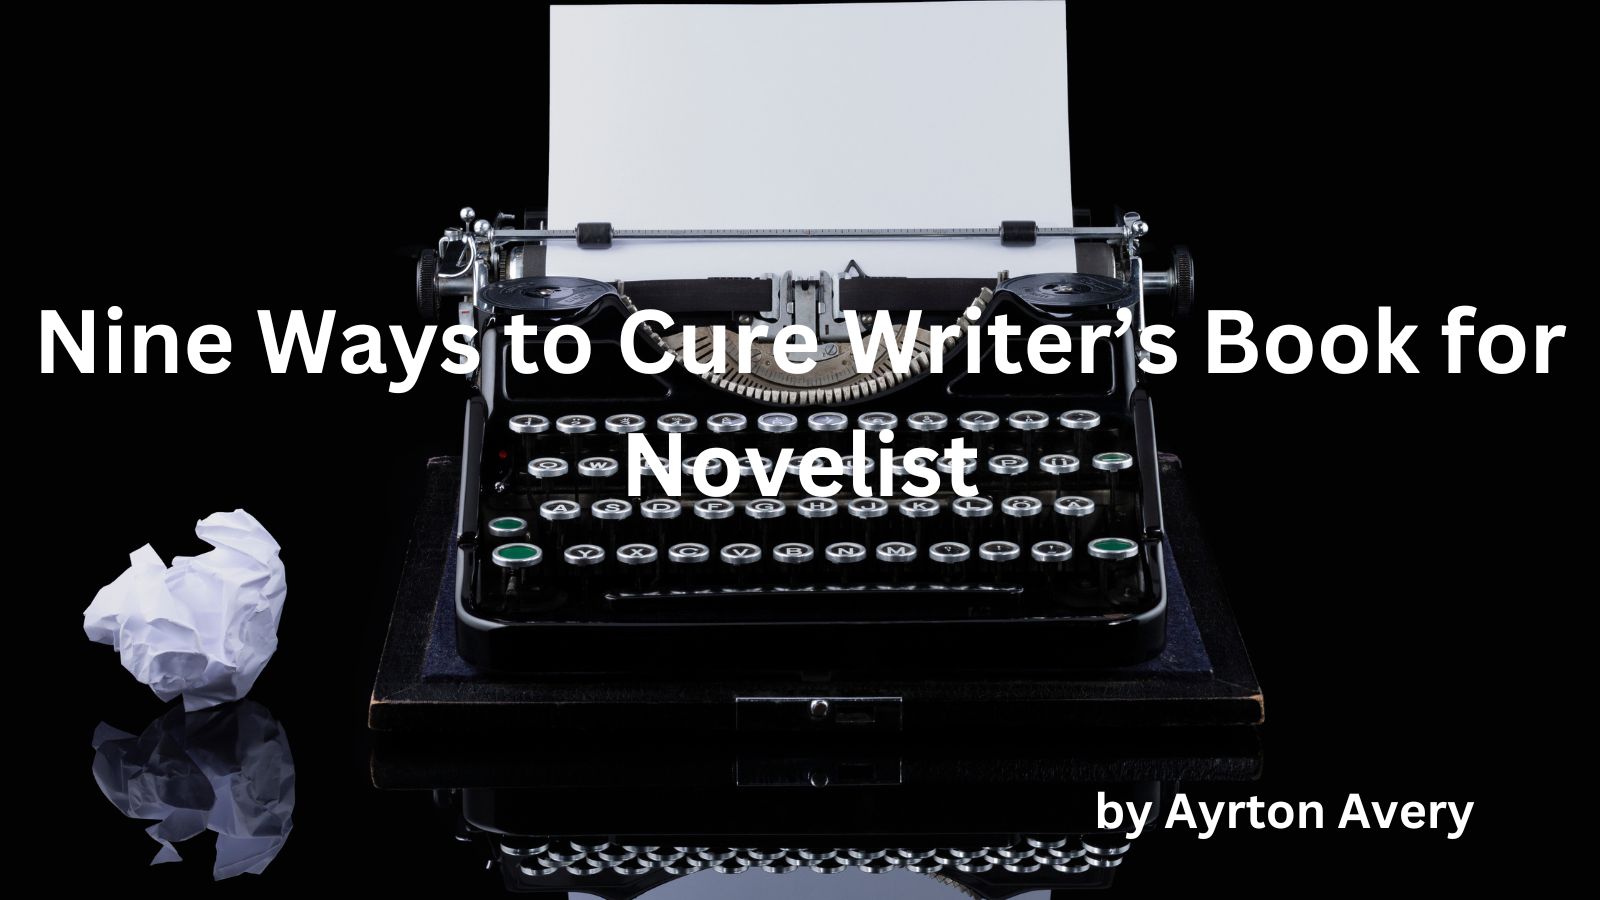 Nine Ways to Cure Writer’s Book for Novelist